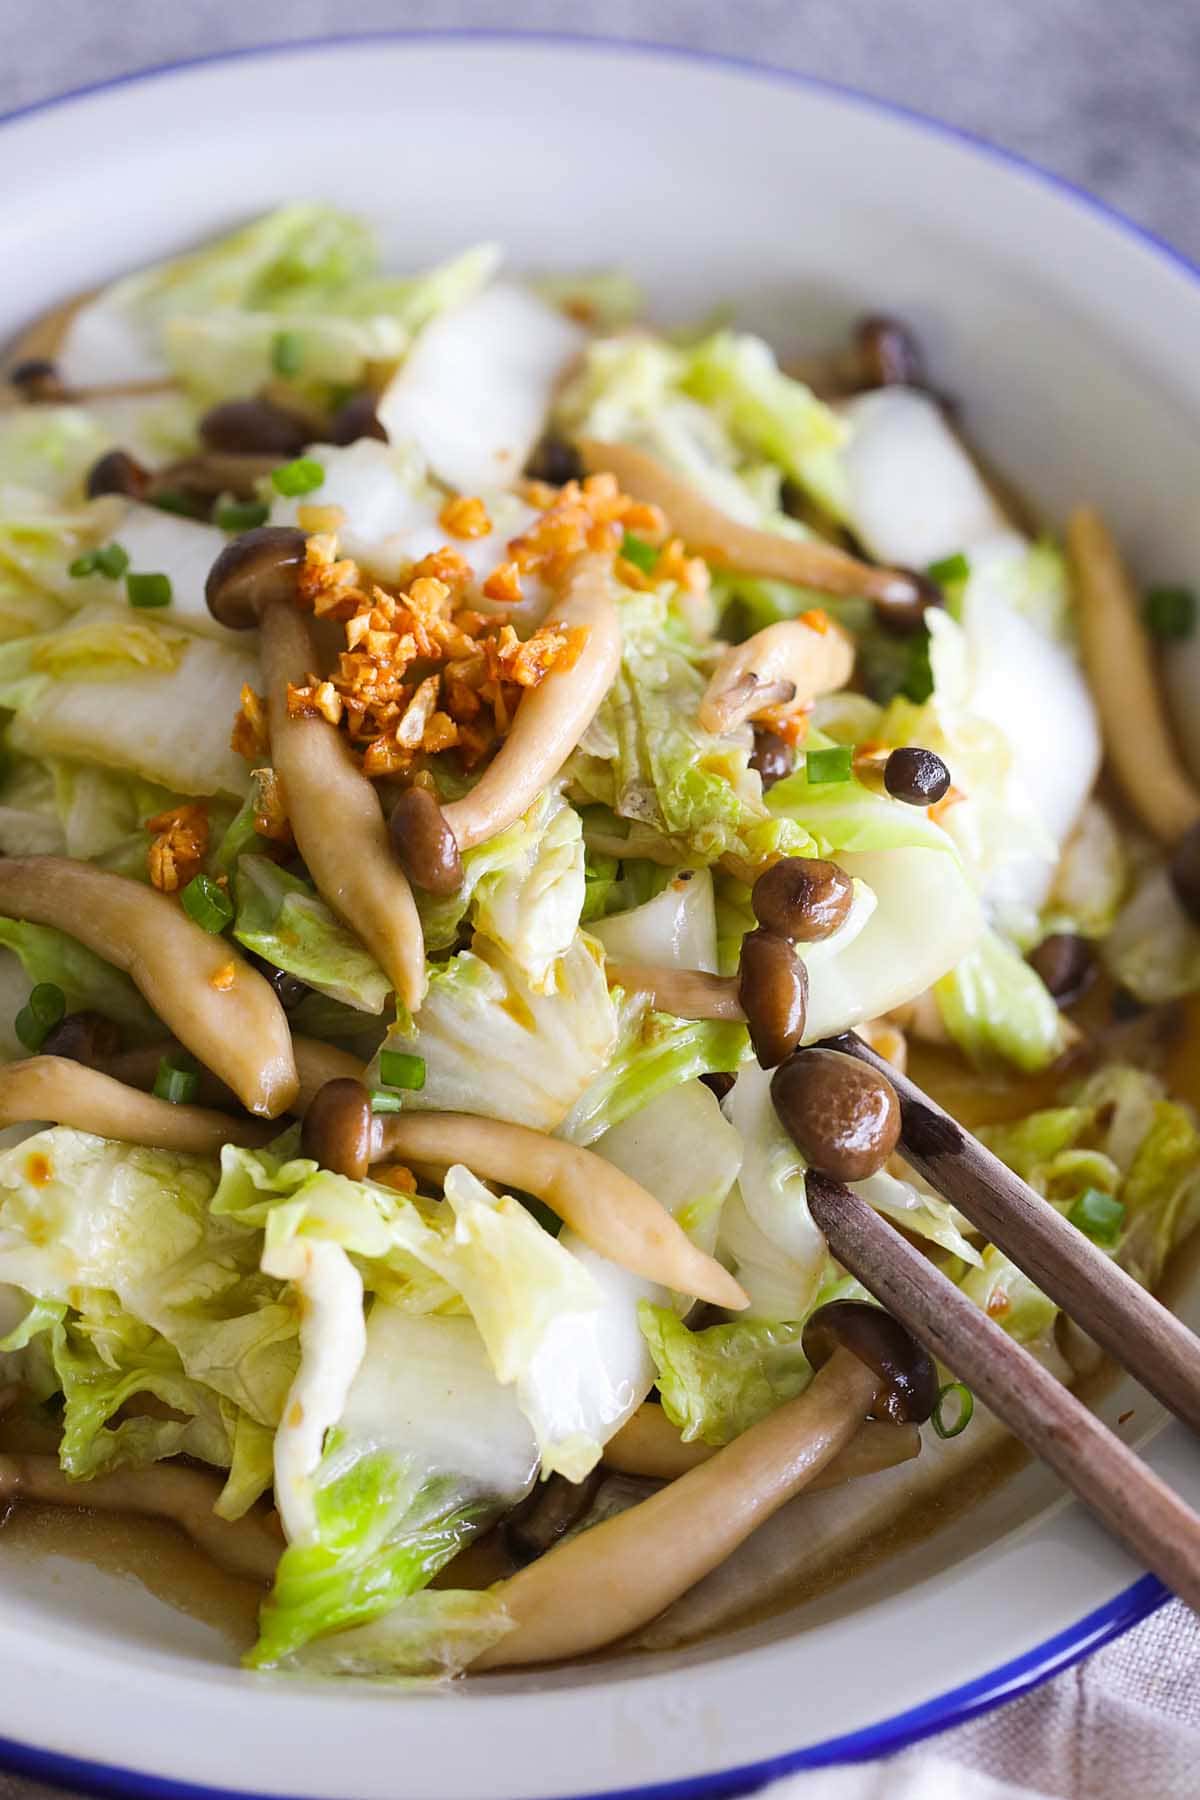 Napa cabbage stir fry with mushroom on a plate.